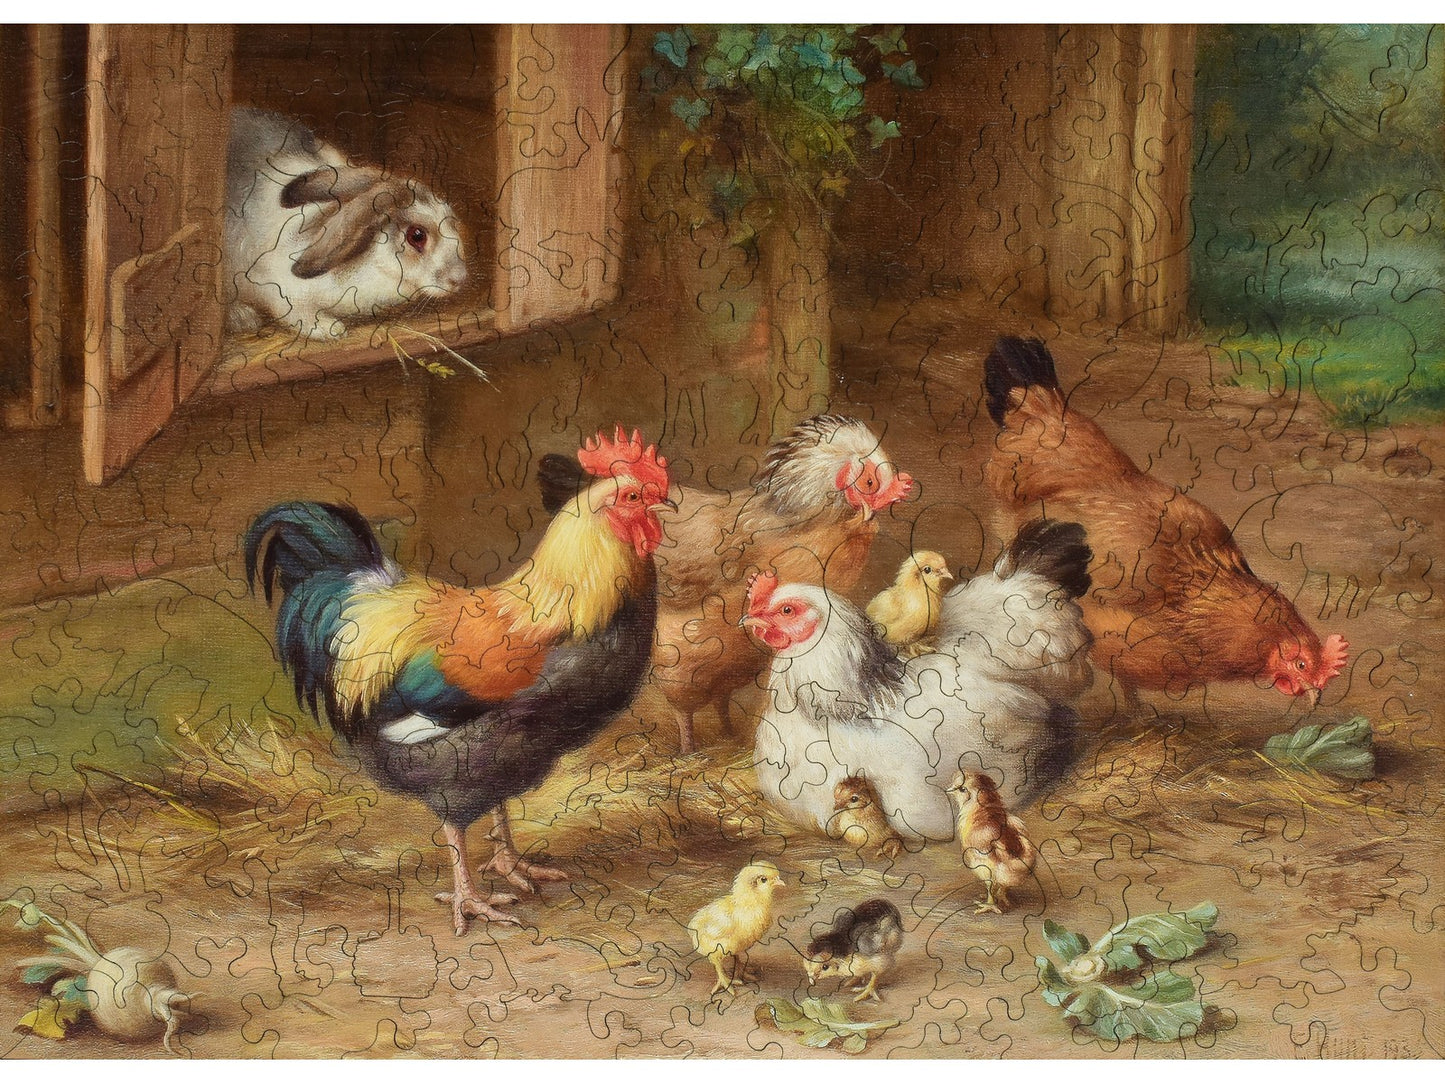 The front of the puzzle, A View from the Hutch, which shows a rabbit and chickens.